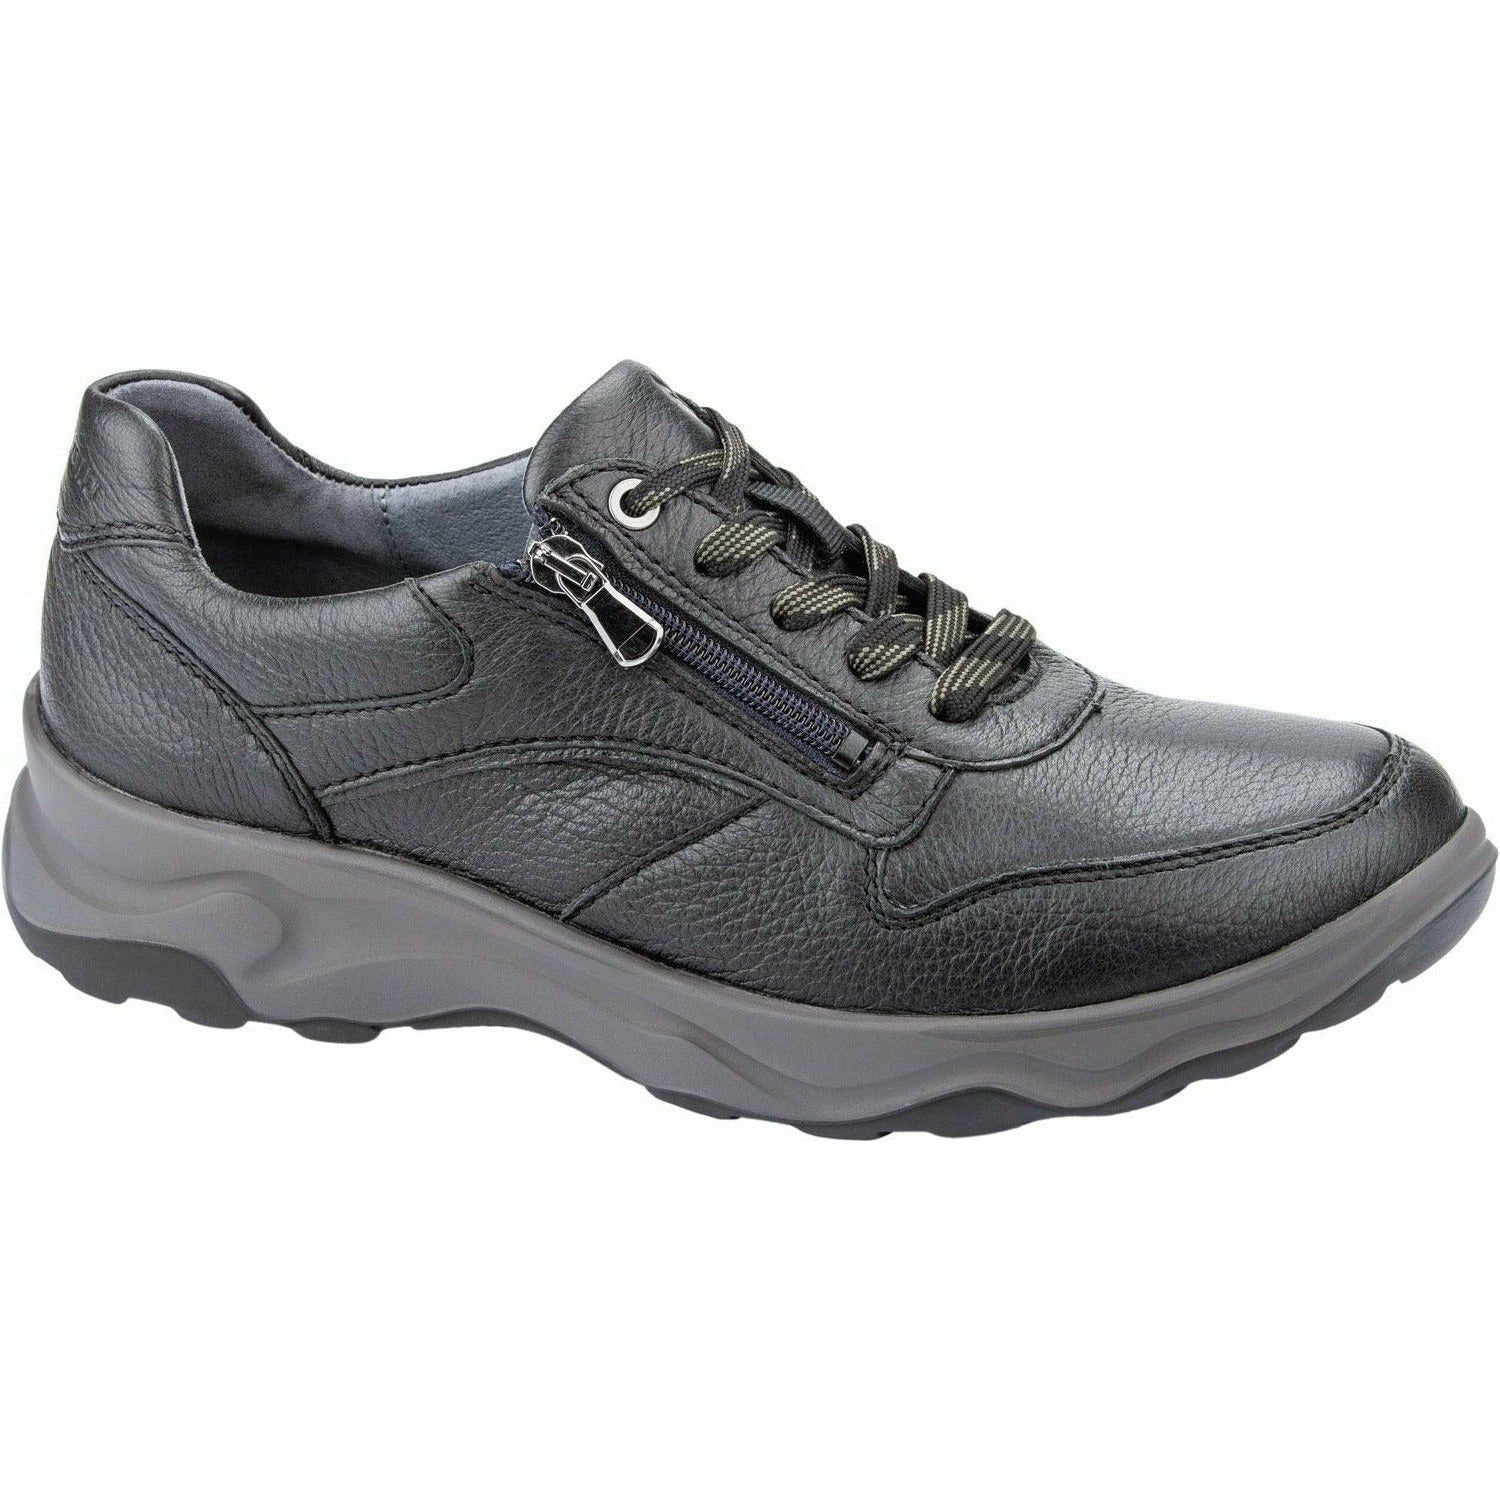 Waldlaufer H-Max - Mens Lace up with Zip Shoe -Wide Fit